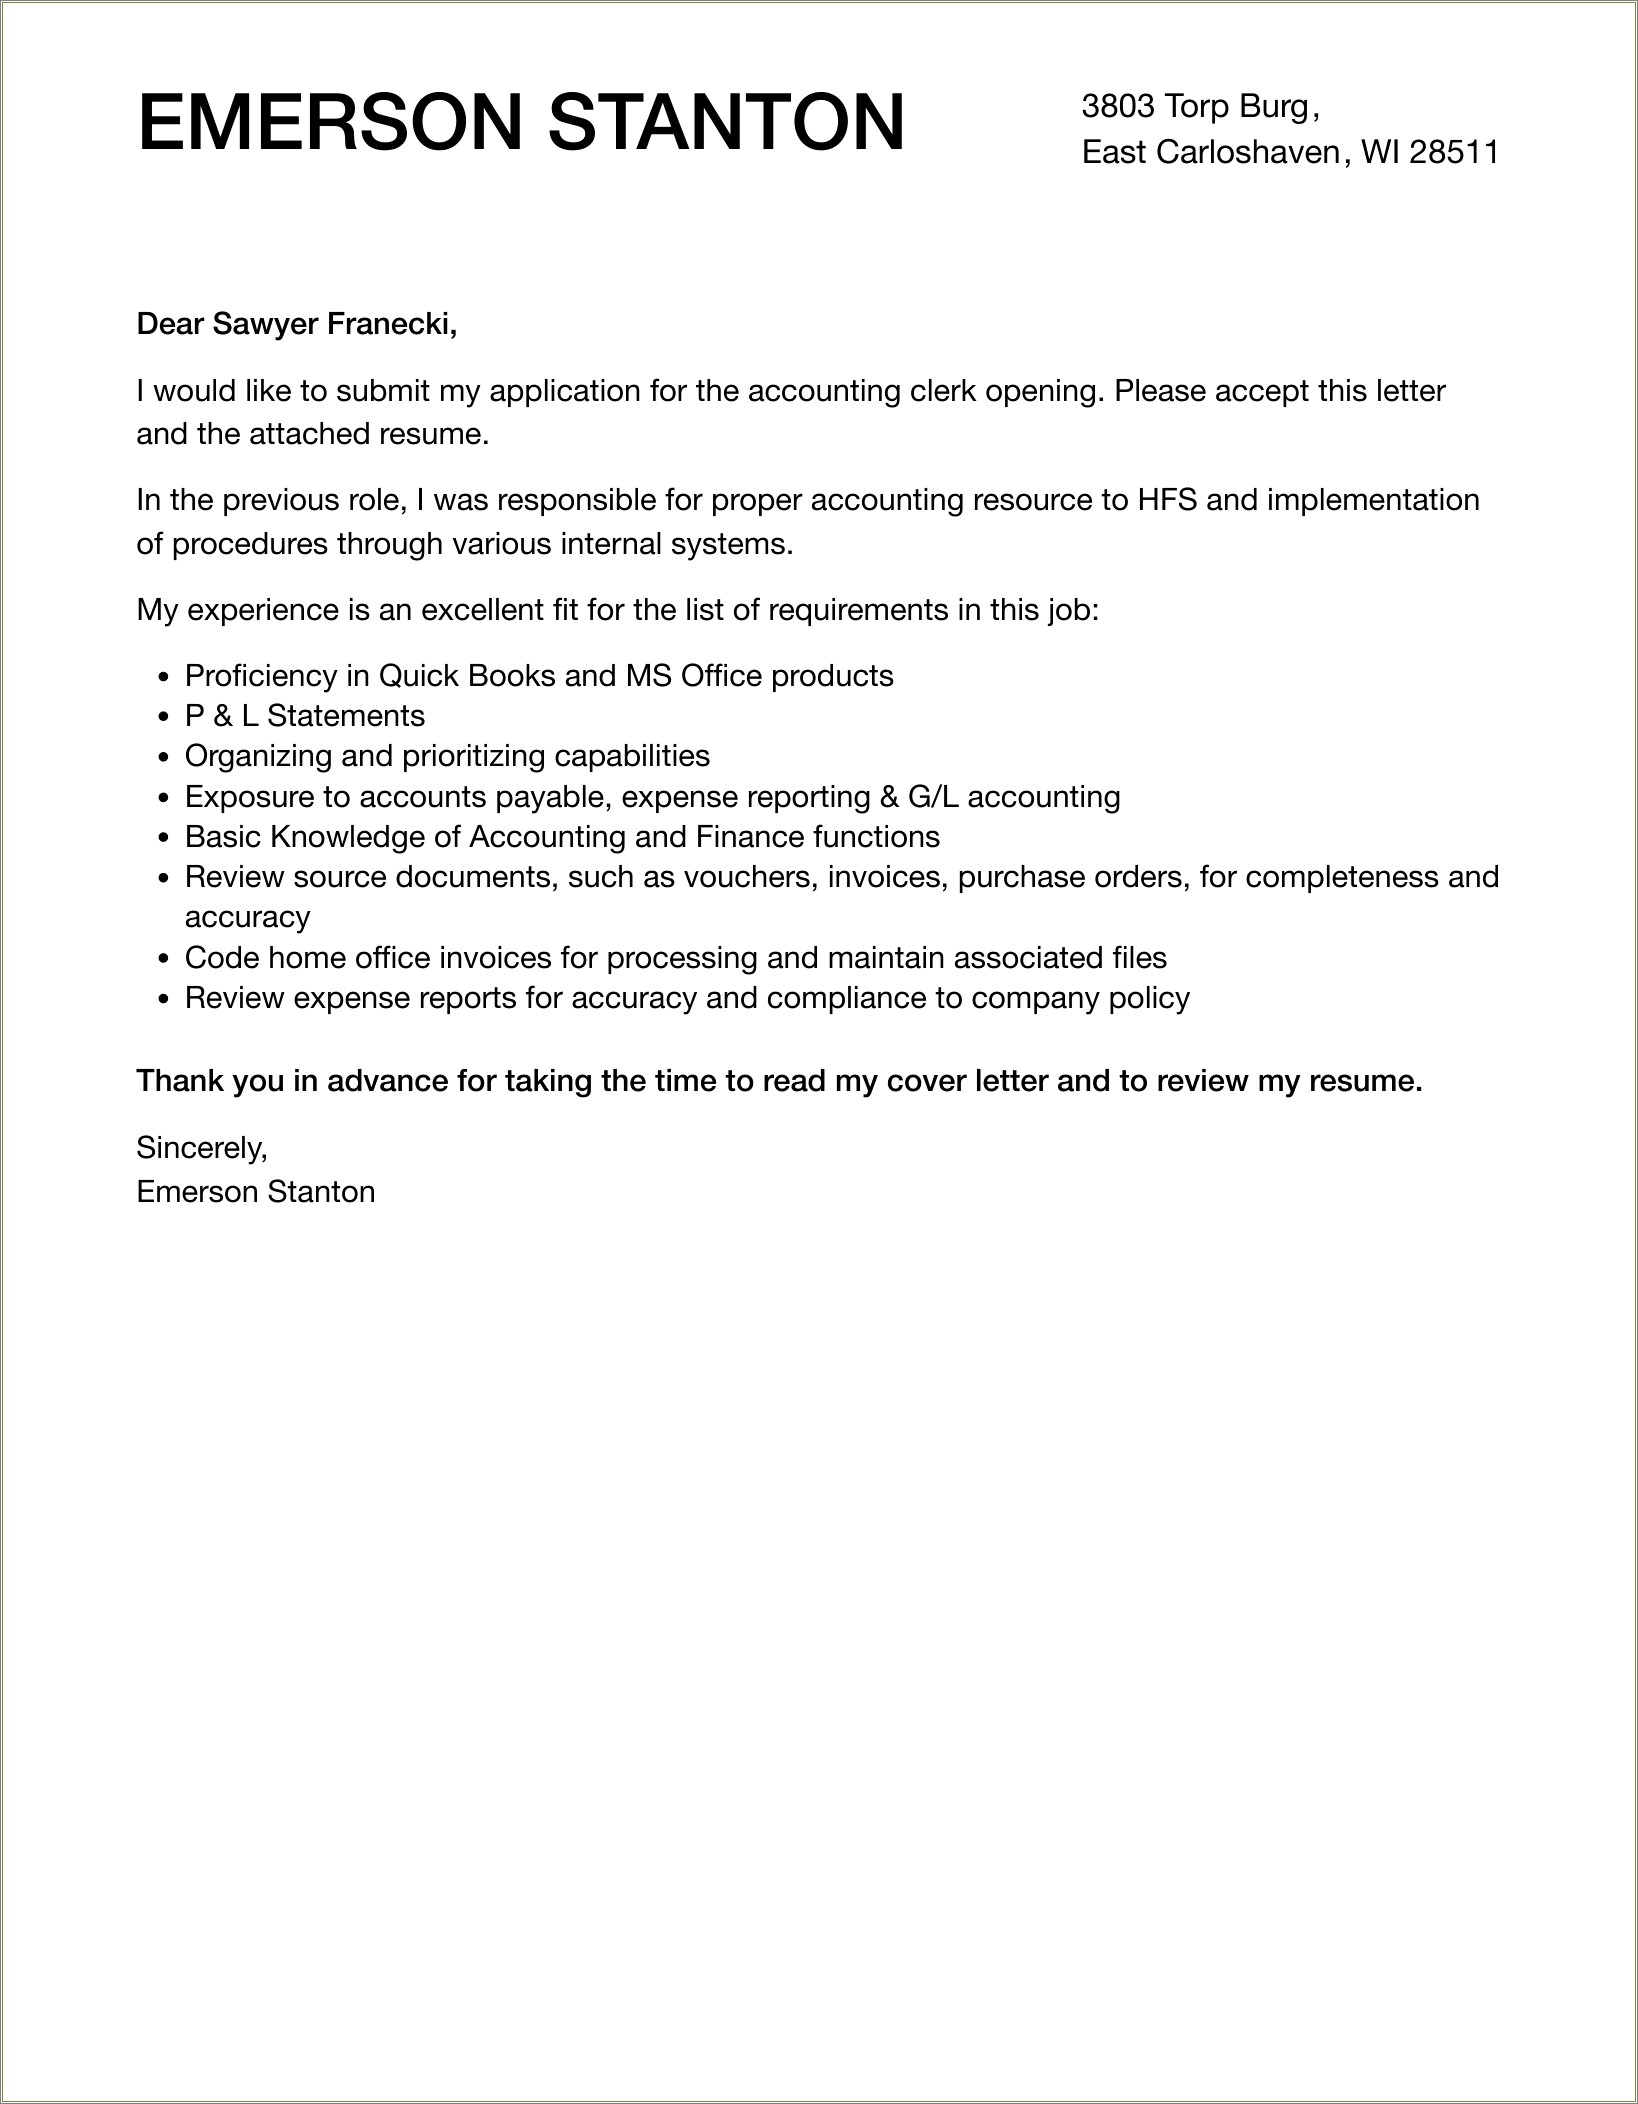 Example Cover Letter And Resume For Invoice Clerk